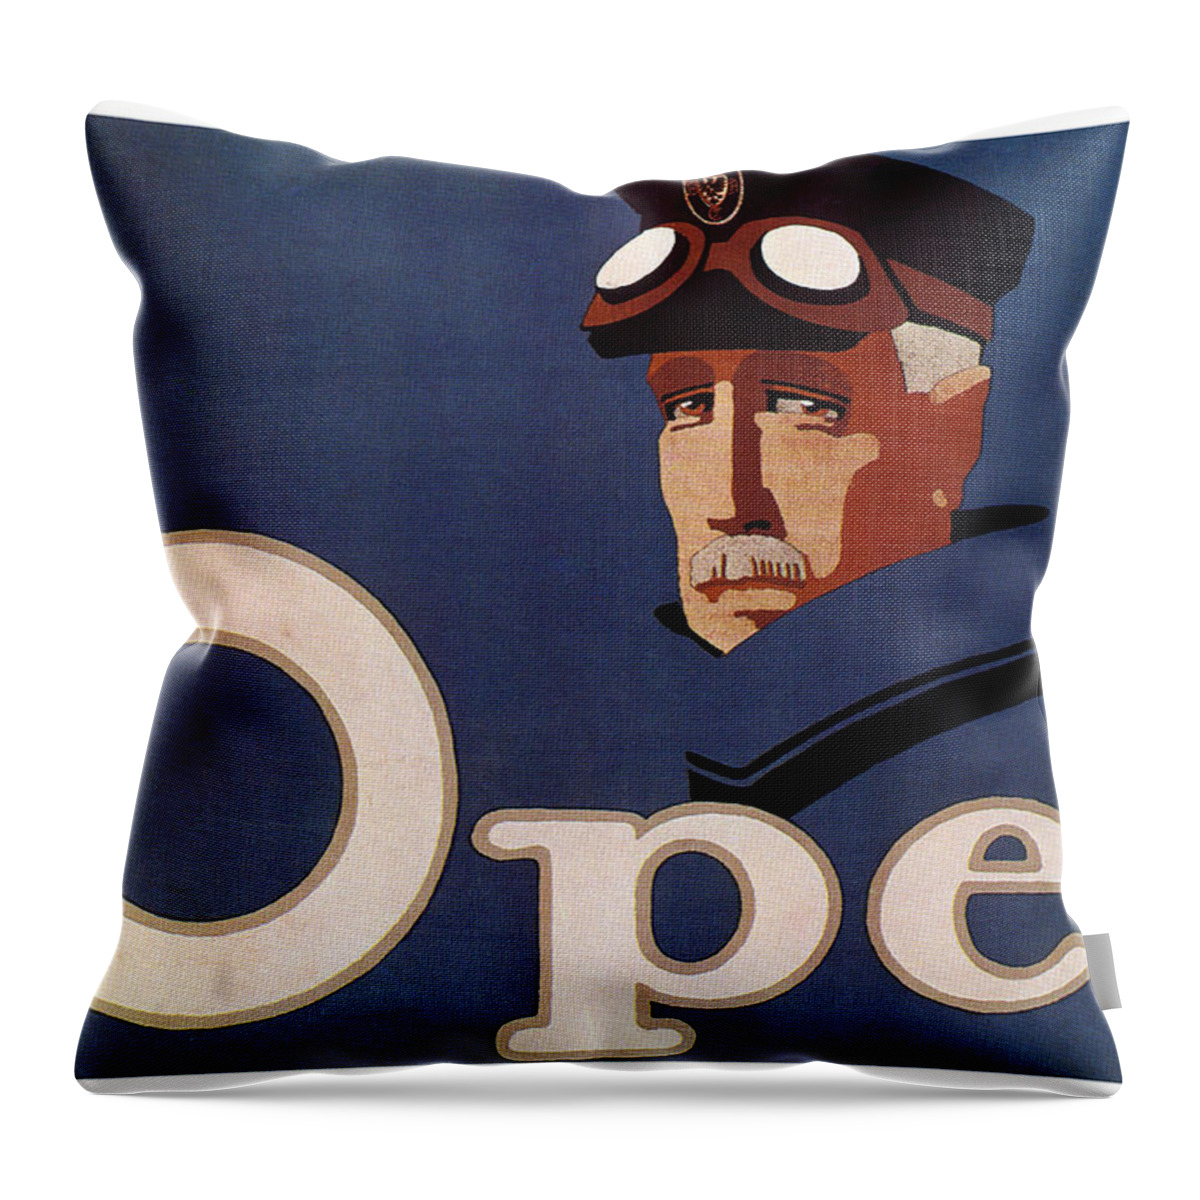 Opel Throw Pillow featuring the mixed media Opel - German Automobile Manufacturer - Vintage Automotive Advertising Poster - Minimal, Blue by Studio Grafiikka